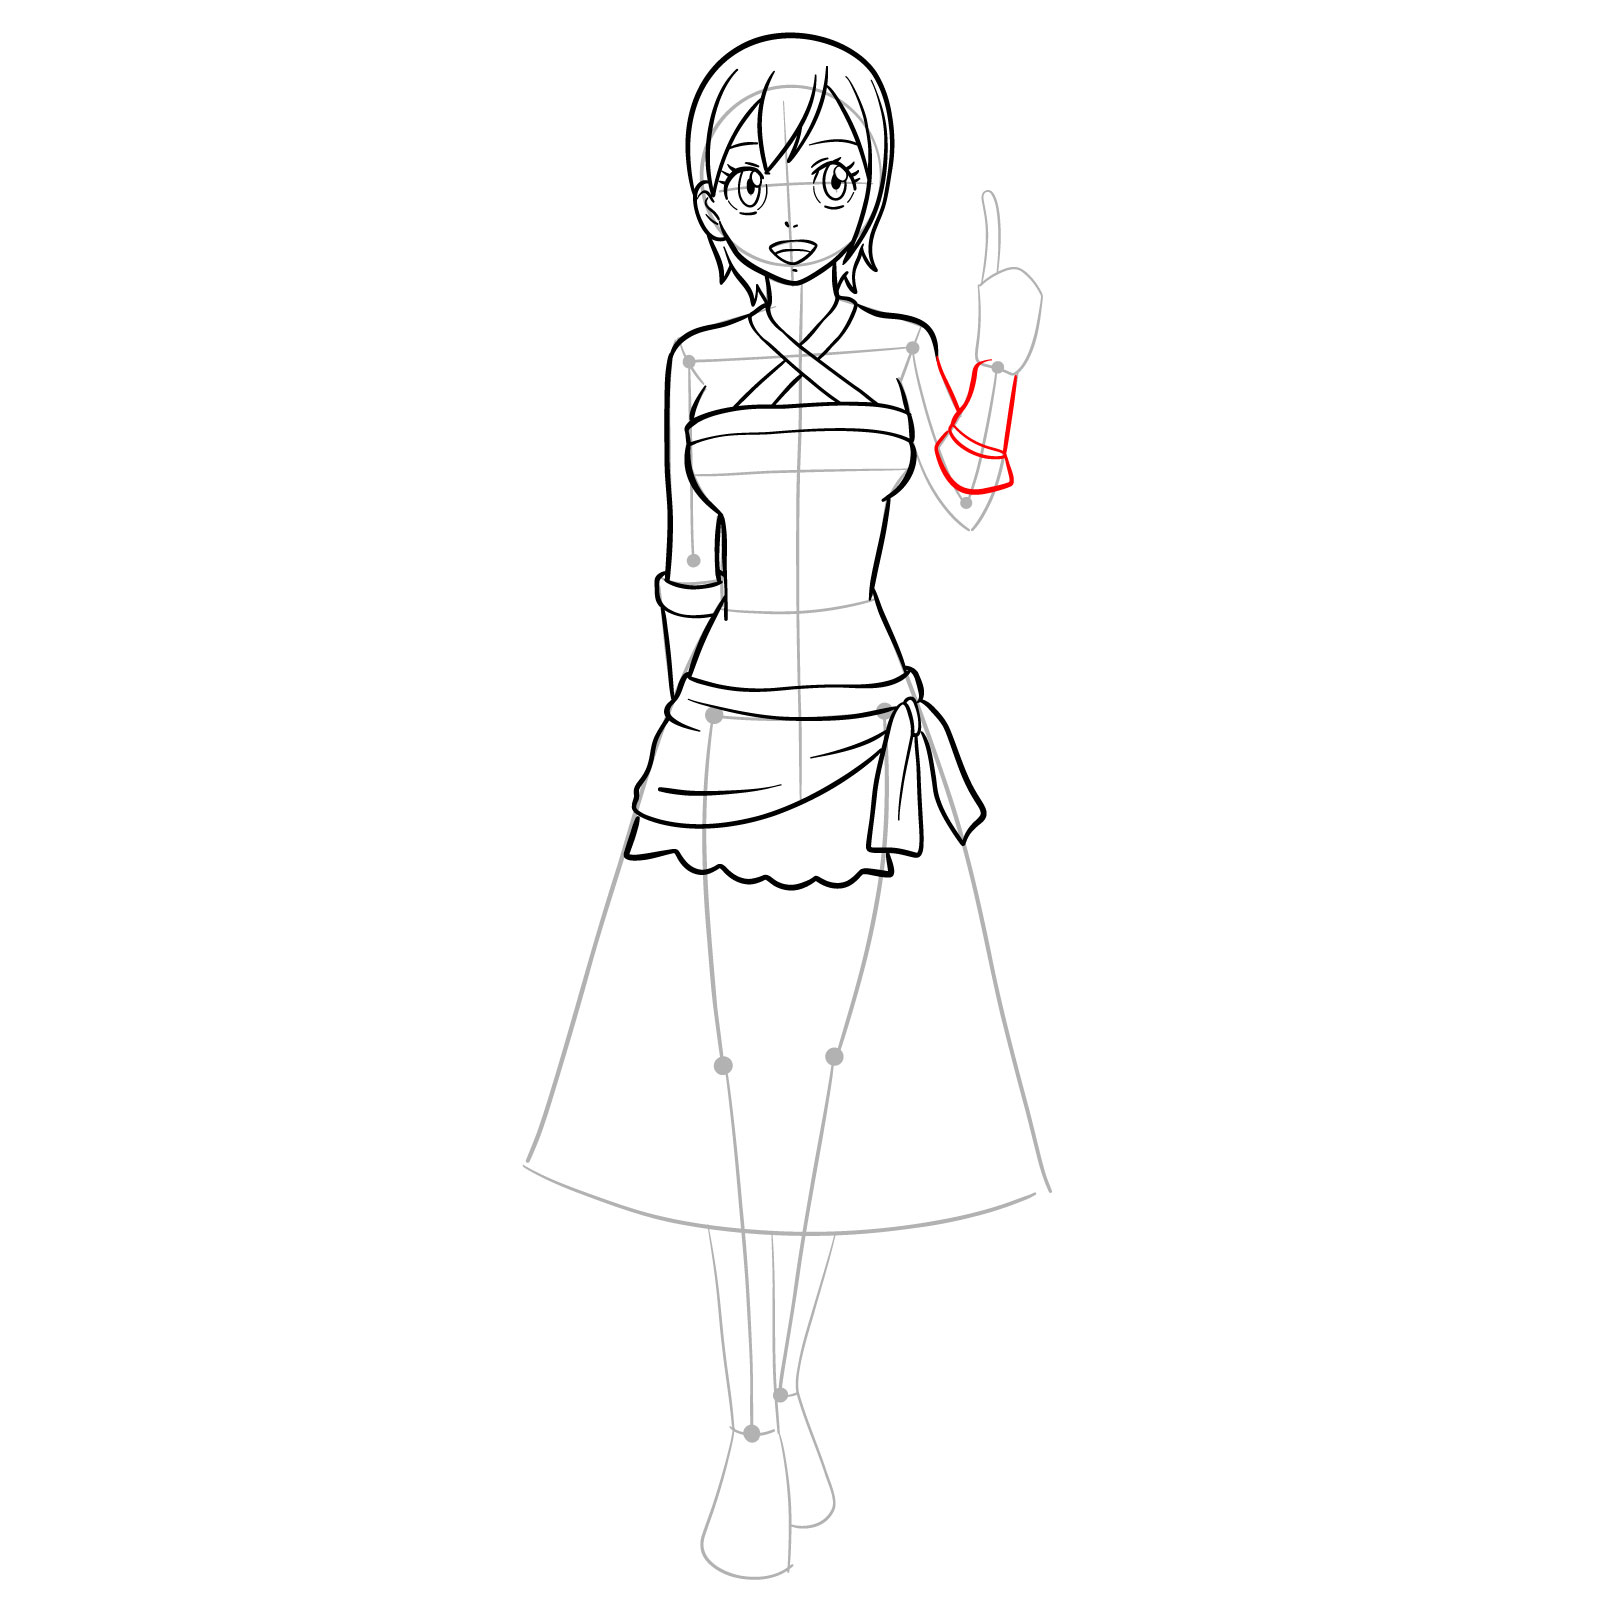 How to draw Lisanna Strauss from Fairy Tail - step 23